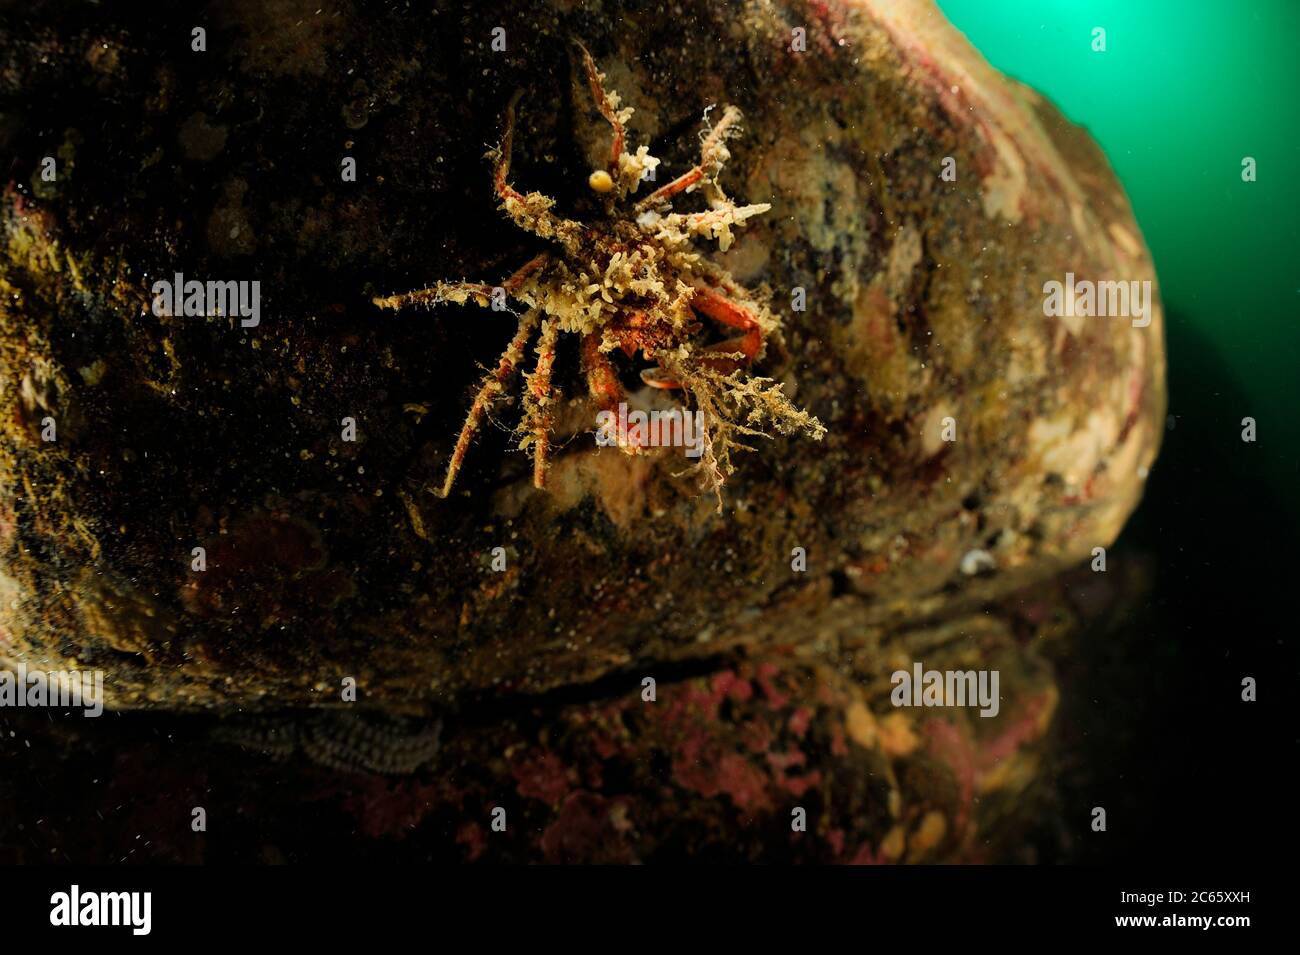 Camouflaged Great spider crab (Hyas araneus) decorated with hydroids, Atlantic Ocean, Strømsholmen, North West Norway Stock Photo